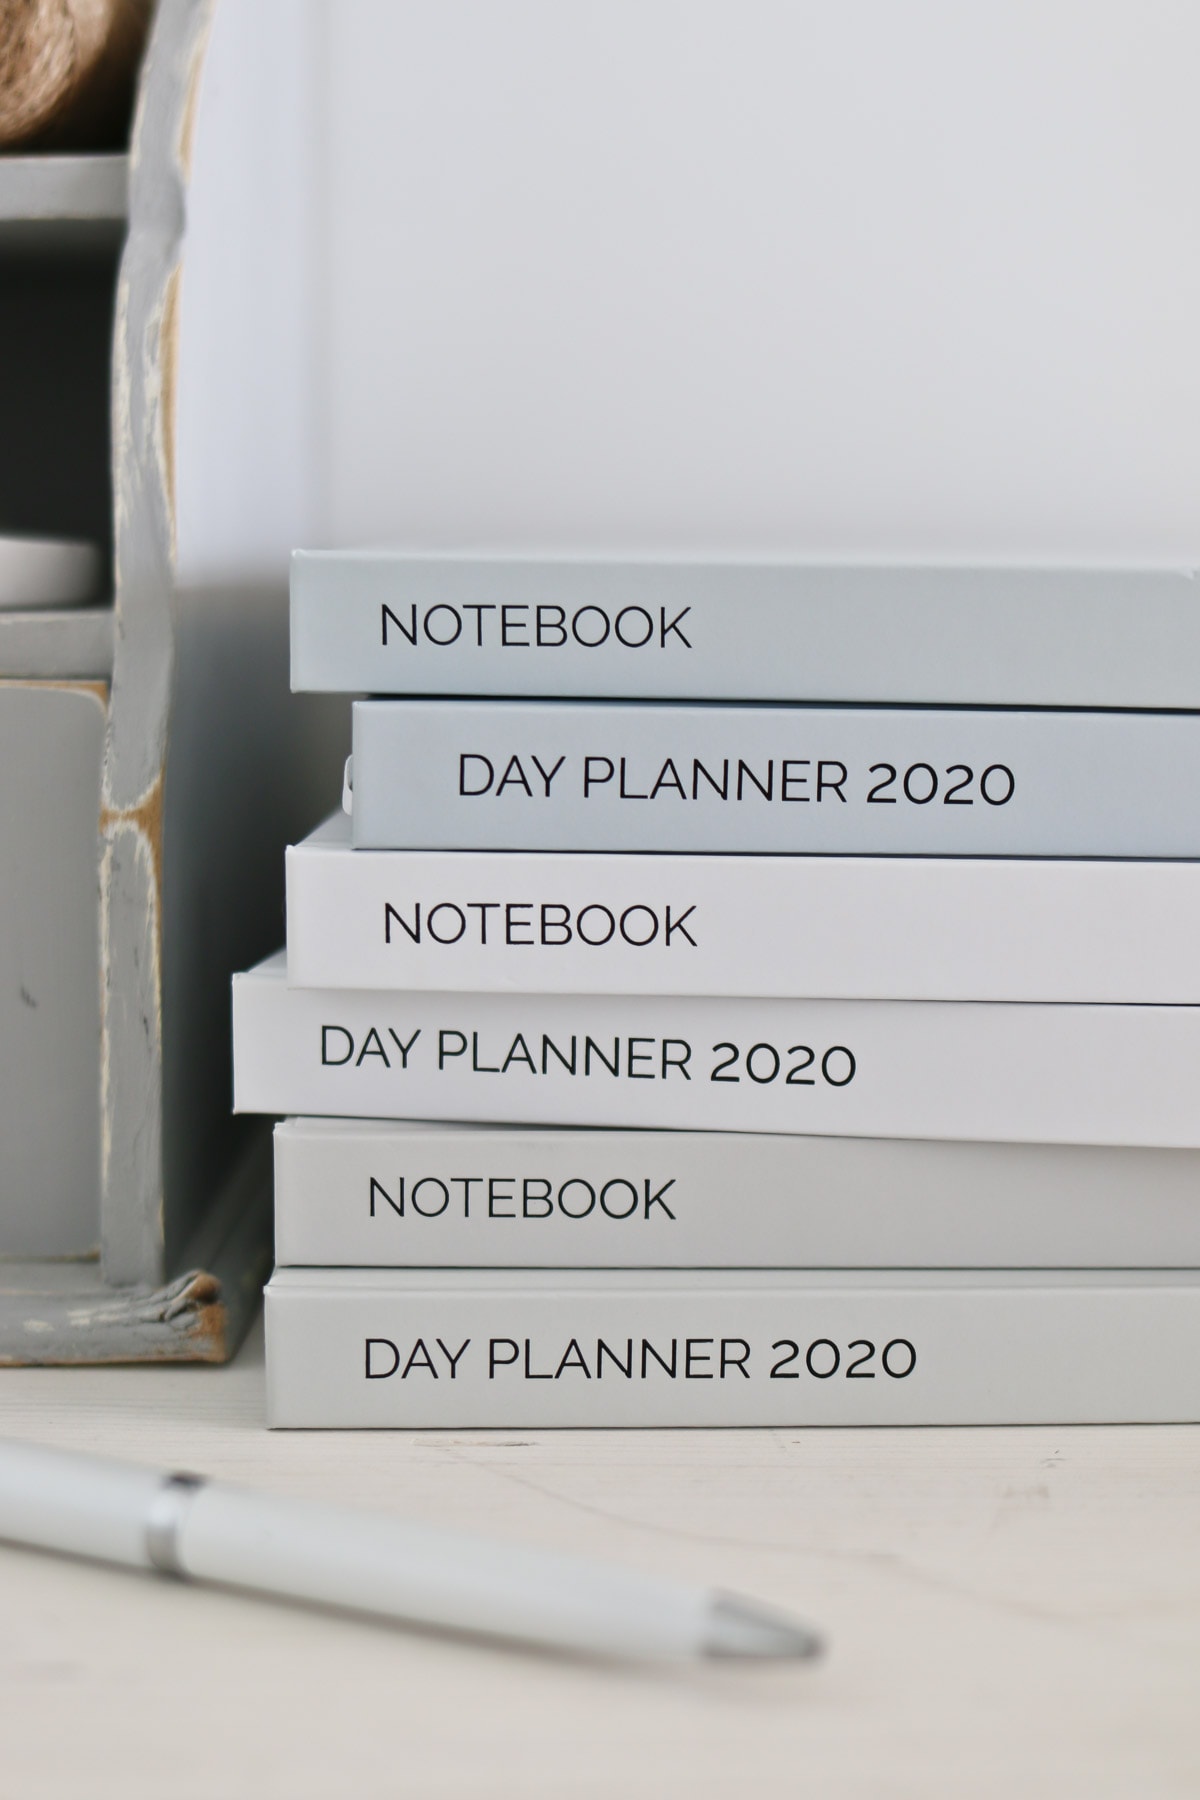 day planners and notebooks for Organizing your Days